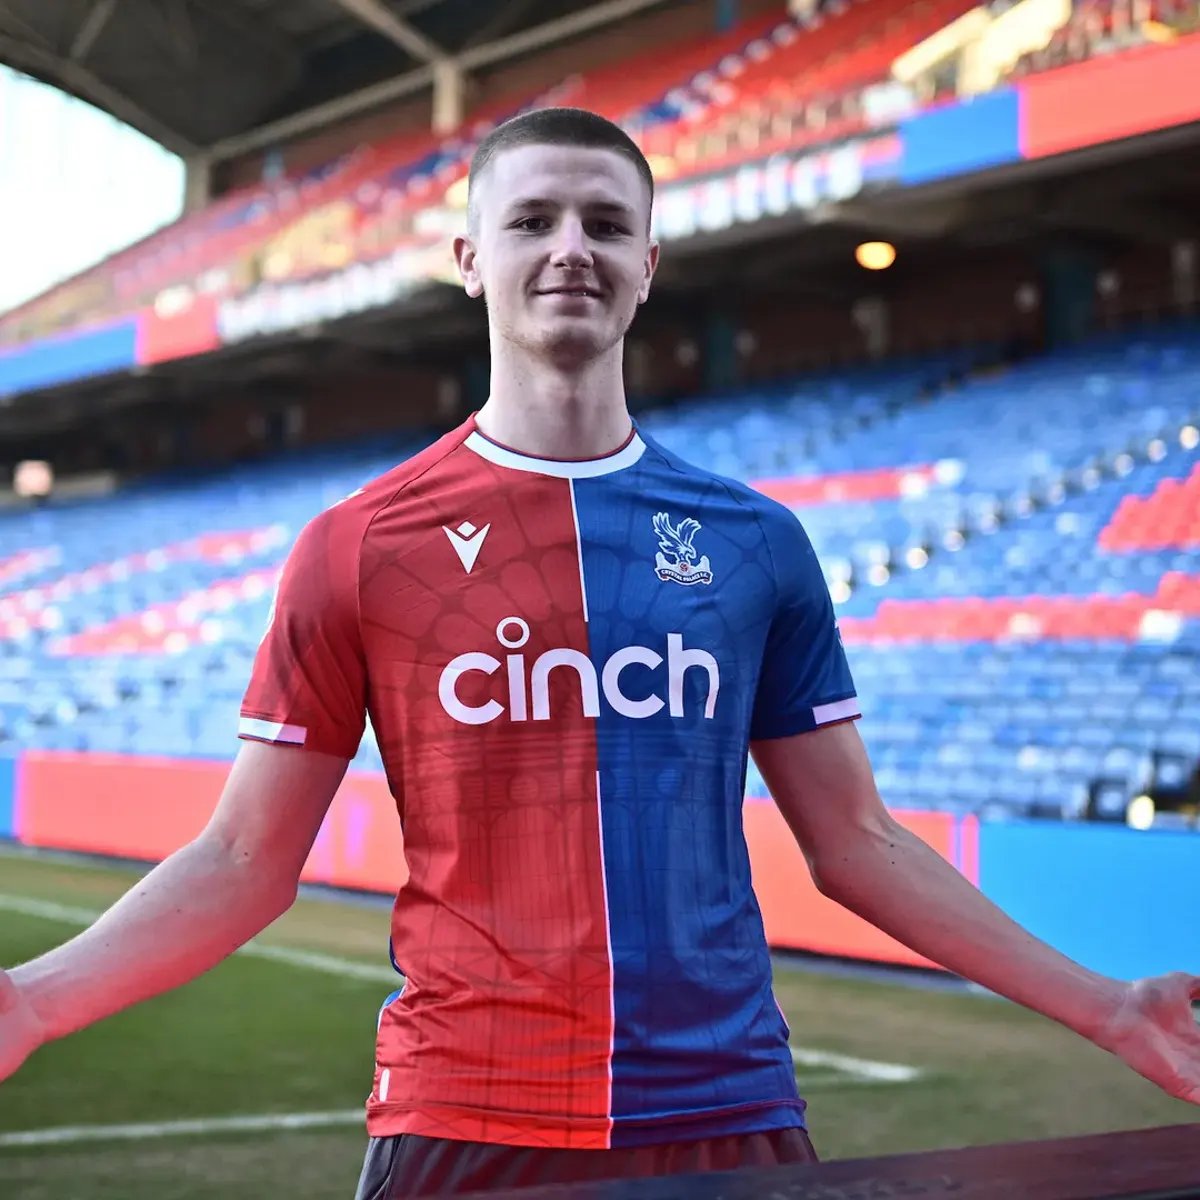 Adam Wharton has been super impressive again for Crystal Palace. Given the lack of defensive midfield profiles, if I were Southgate, I would seriously consider him for England this summer. #CRYMUN